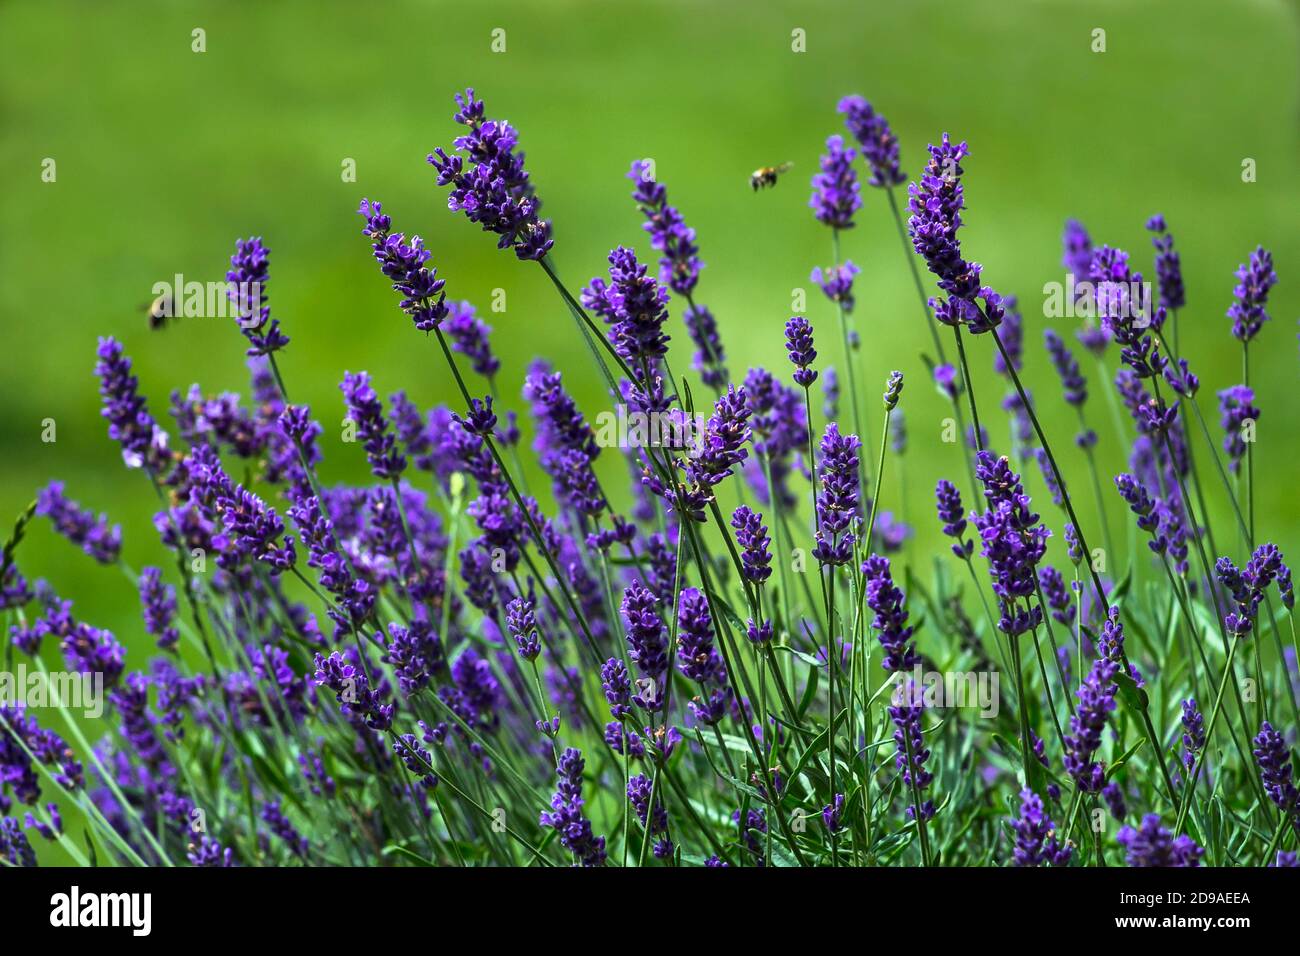 Blue lavender bush with two bees flying around Stock Photo